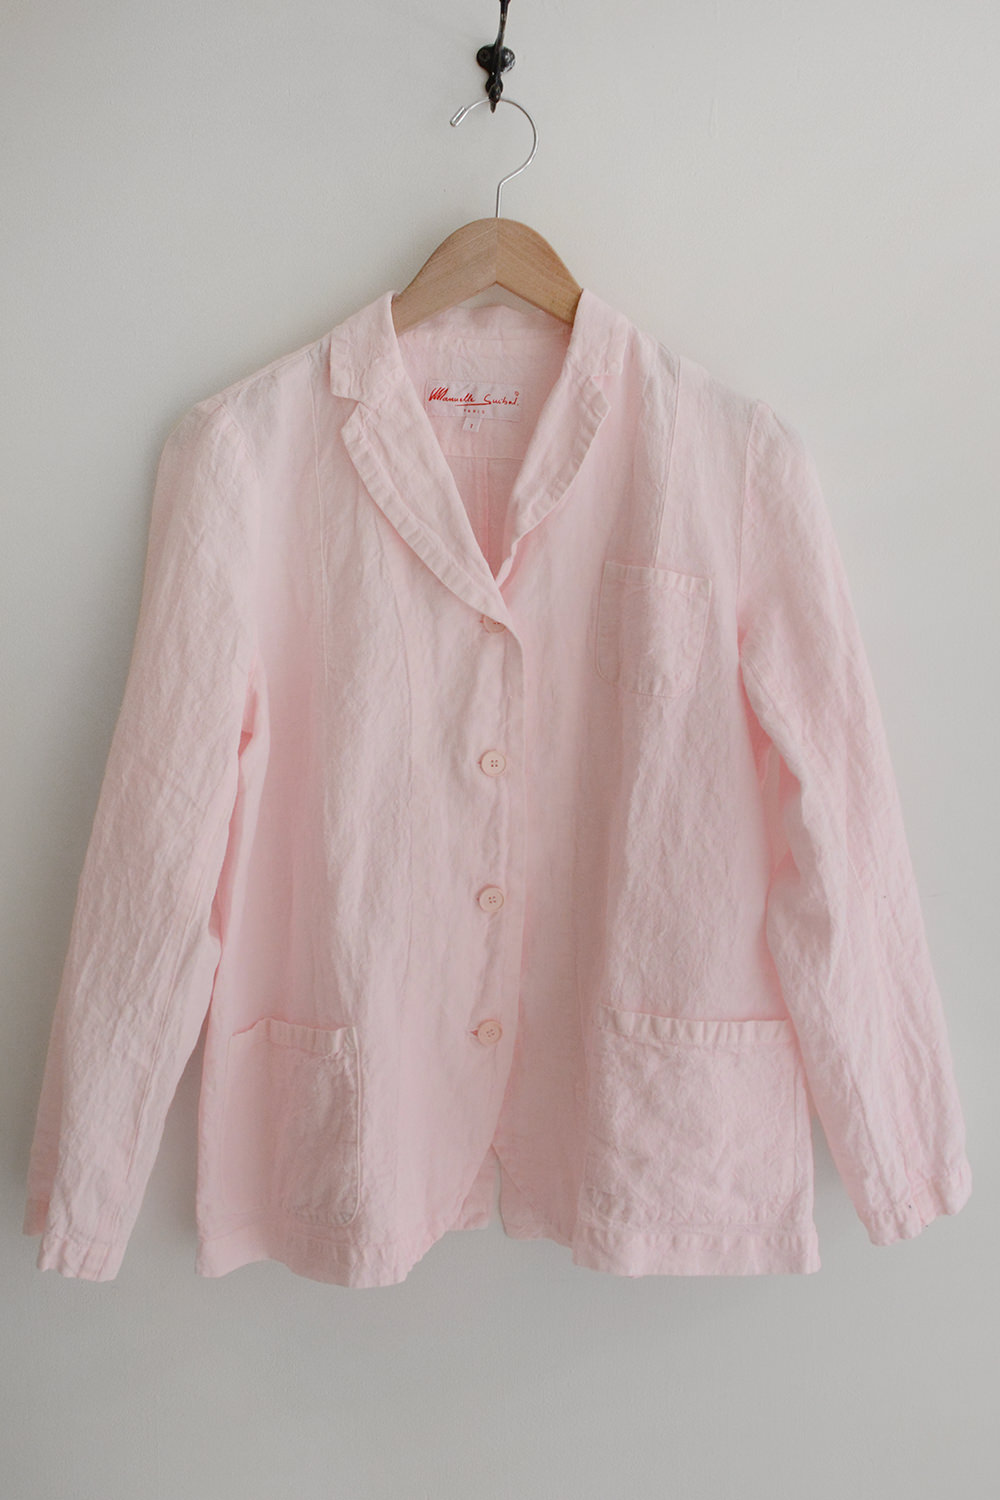 Manuelle Guibal Linen Jacket in Think Pink Top Picture